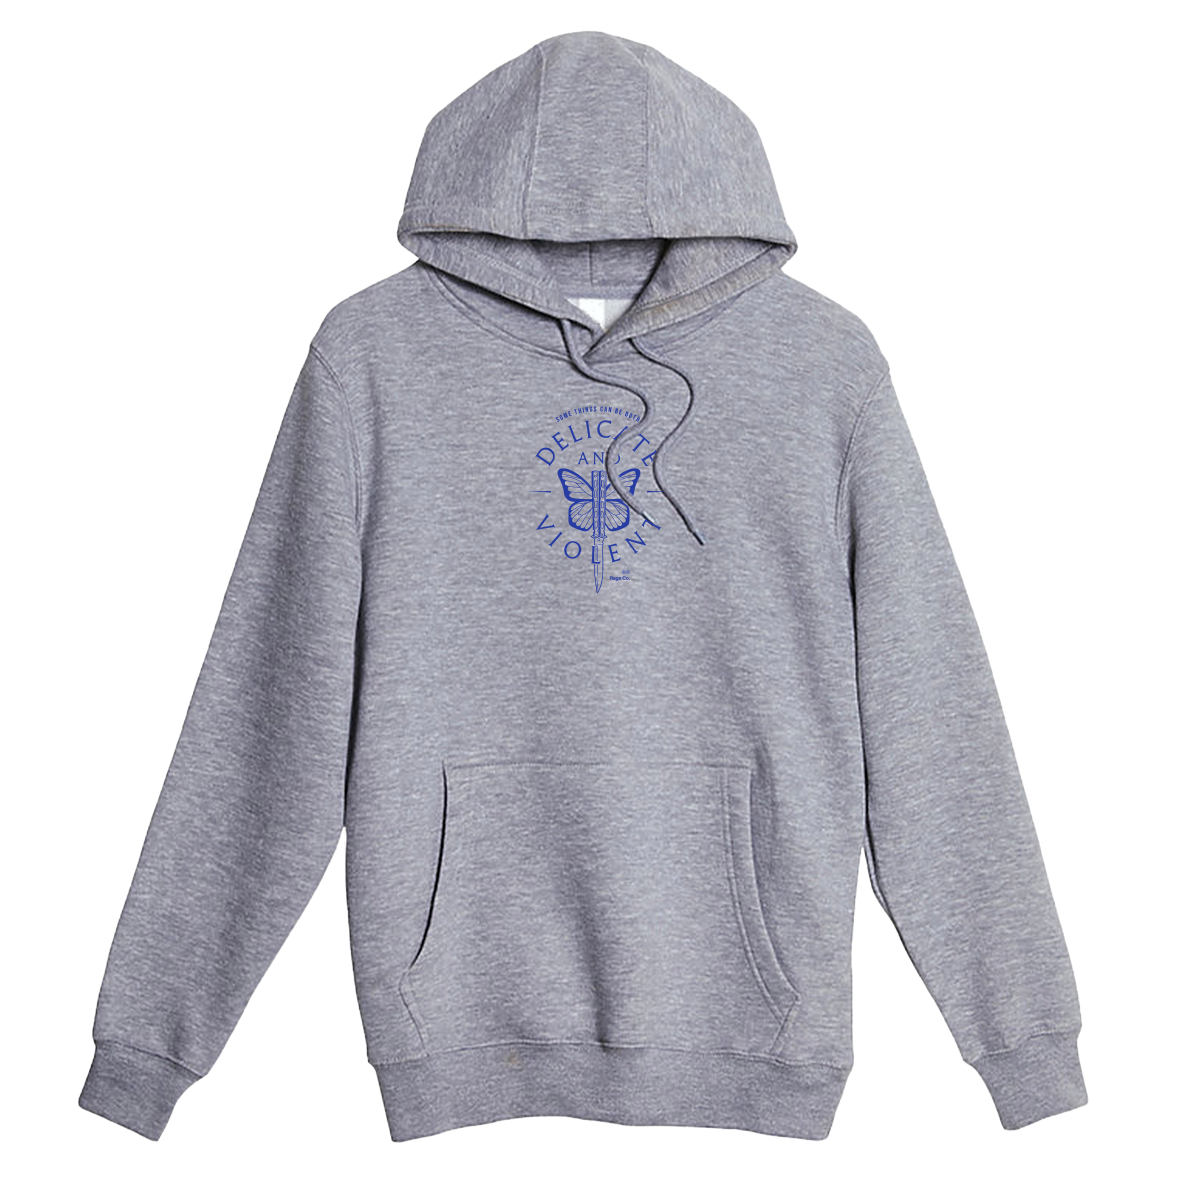 Delicate and Violent Hoodie